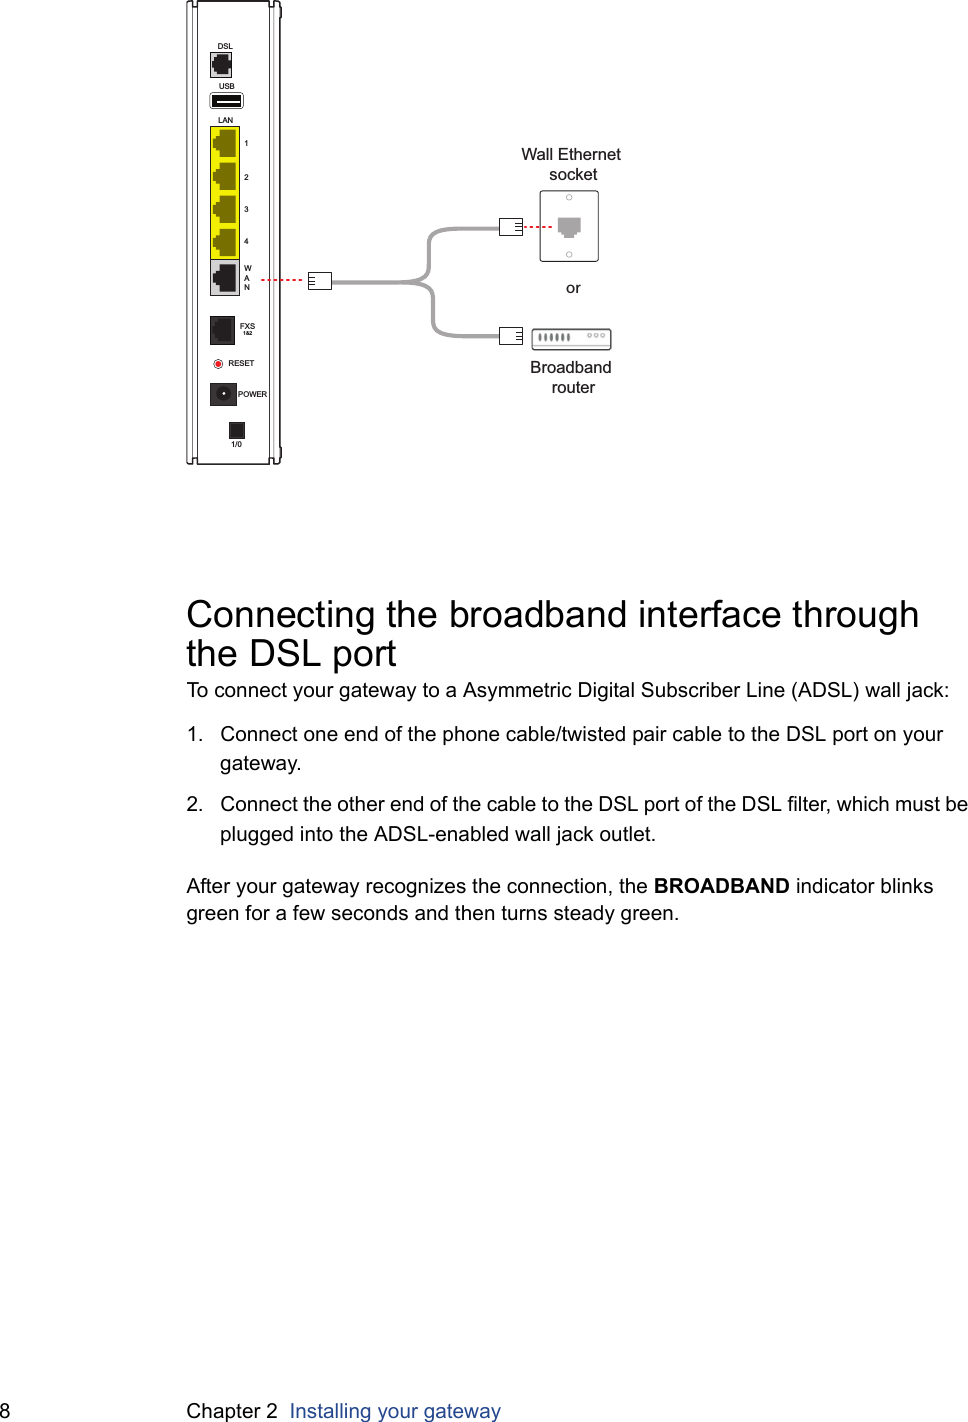 8 Chapter 2  Installing your gatewayConnecting the broadband interface through the DSL portTo connect your gateway to a Asymmetric Digital Subscriber Line (ADSL) wall jack:1. Connect one end of the phone cable/twisted pair cable to the DSL port on your gateway.2. Connect the other end of the cable to the DSL port of the DSL filter, which must be plugged into the ADSL-enabled wall jack outlet.After your gateway recognizes the connection, the BROADBAND indicator blinks green for a few seconds and then turns steady green.Wall Ethernet socketUSBLAN1234WANDSLFXS1&amp;2RESETPOWER1/0Broadband routeror